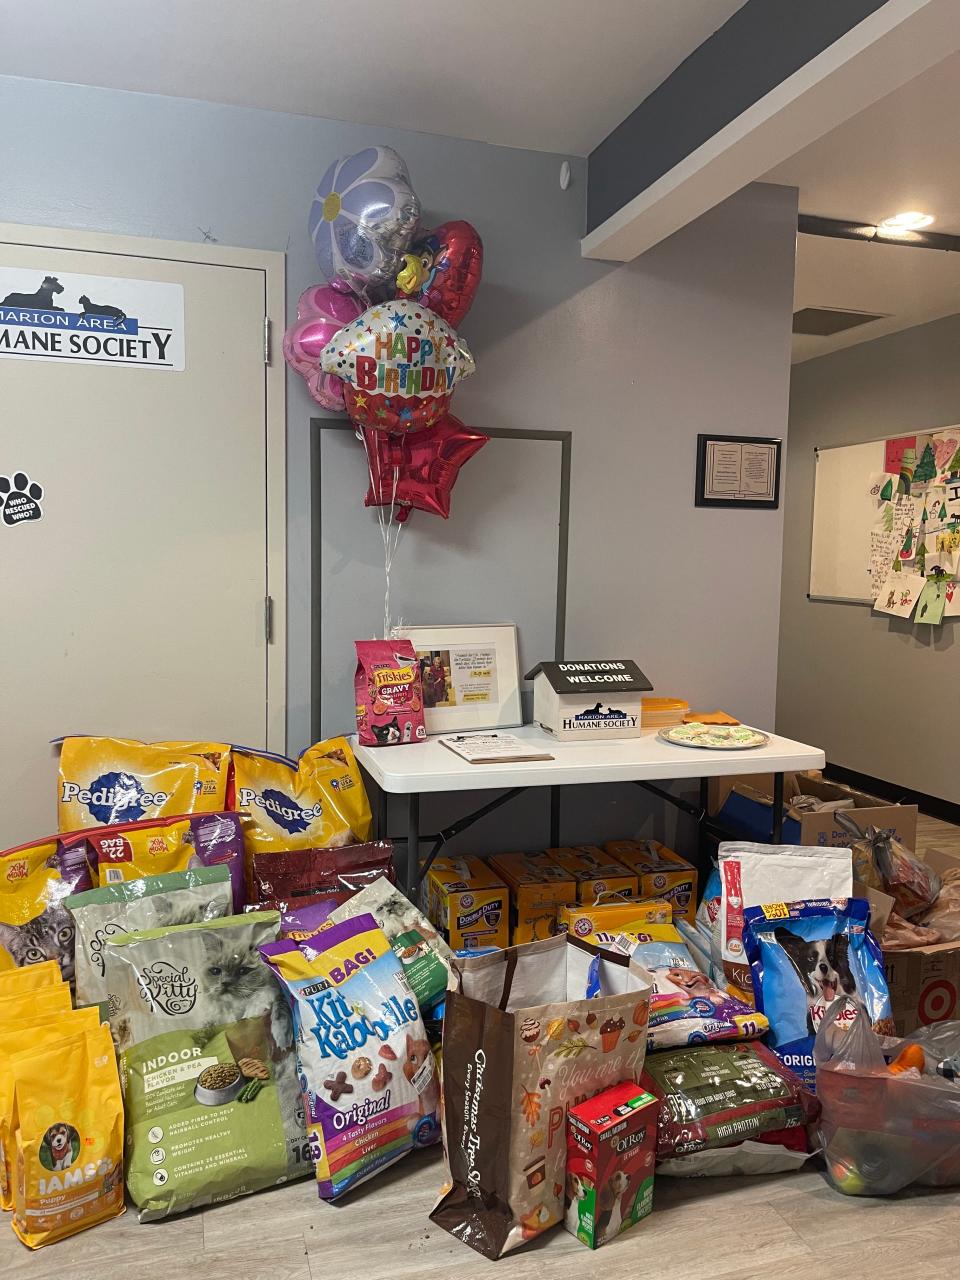 A room full of physical donations was received by the Marion Area Humane Society for its Betty White Challenge birthday event.